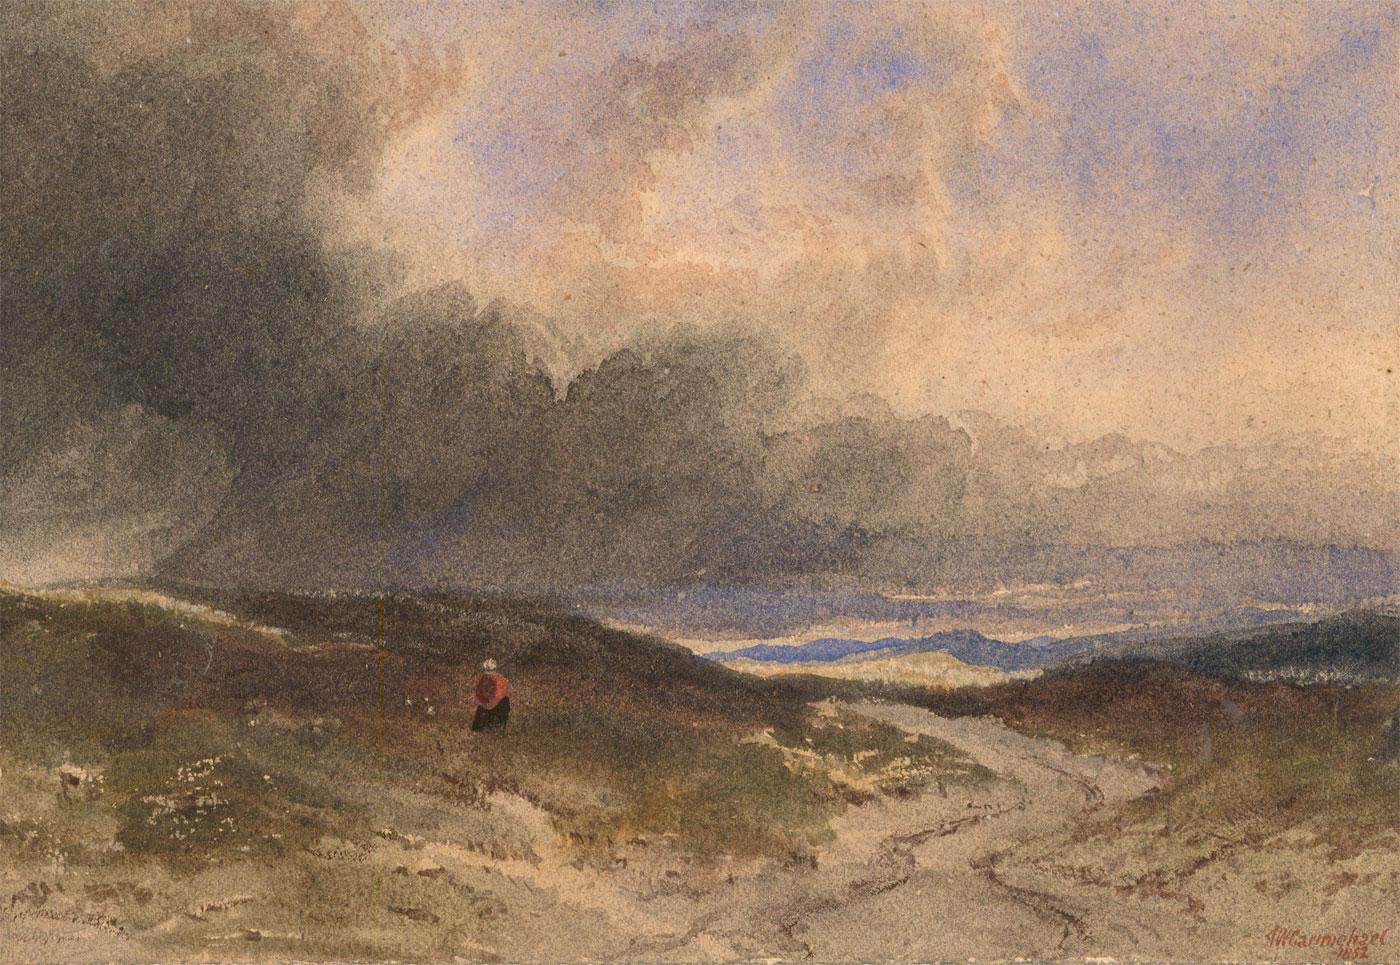 A delightful watercolour sketch depicting a lone figure walking towards the coastline. Signed and dated to the lower right. On paper.